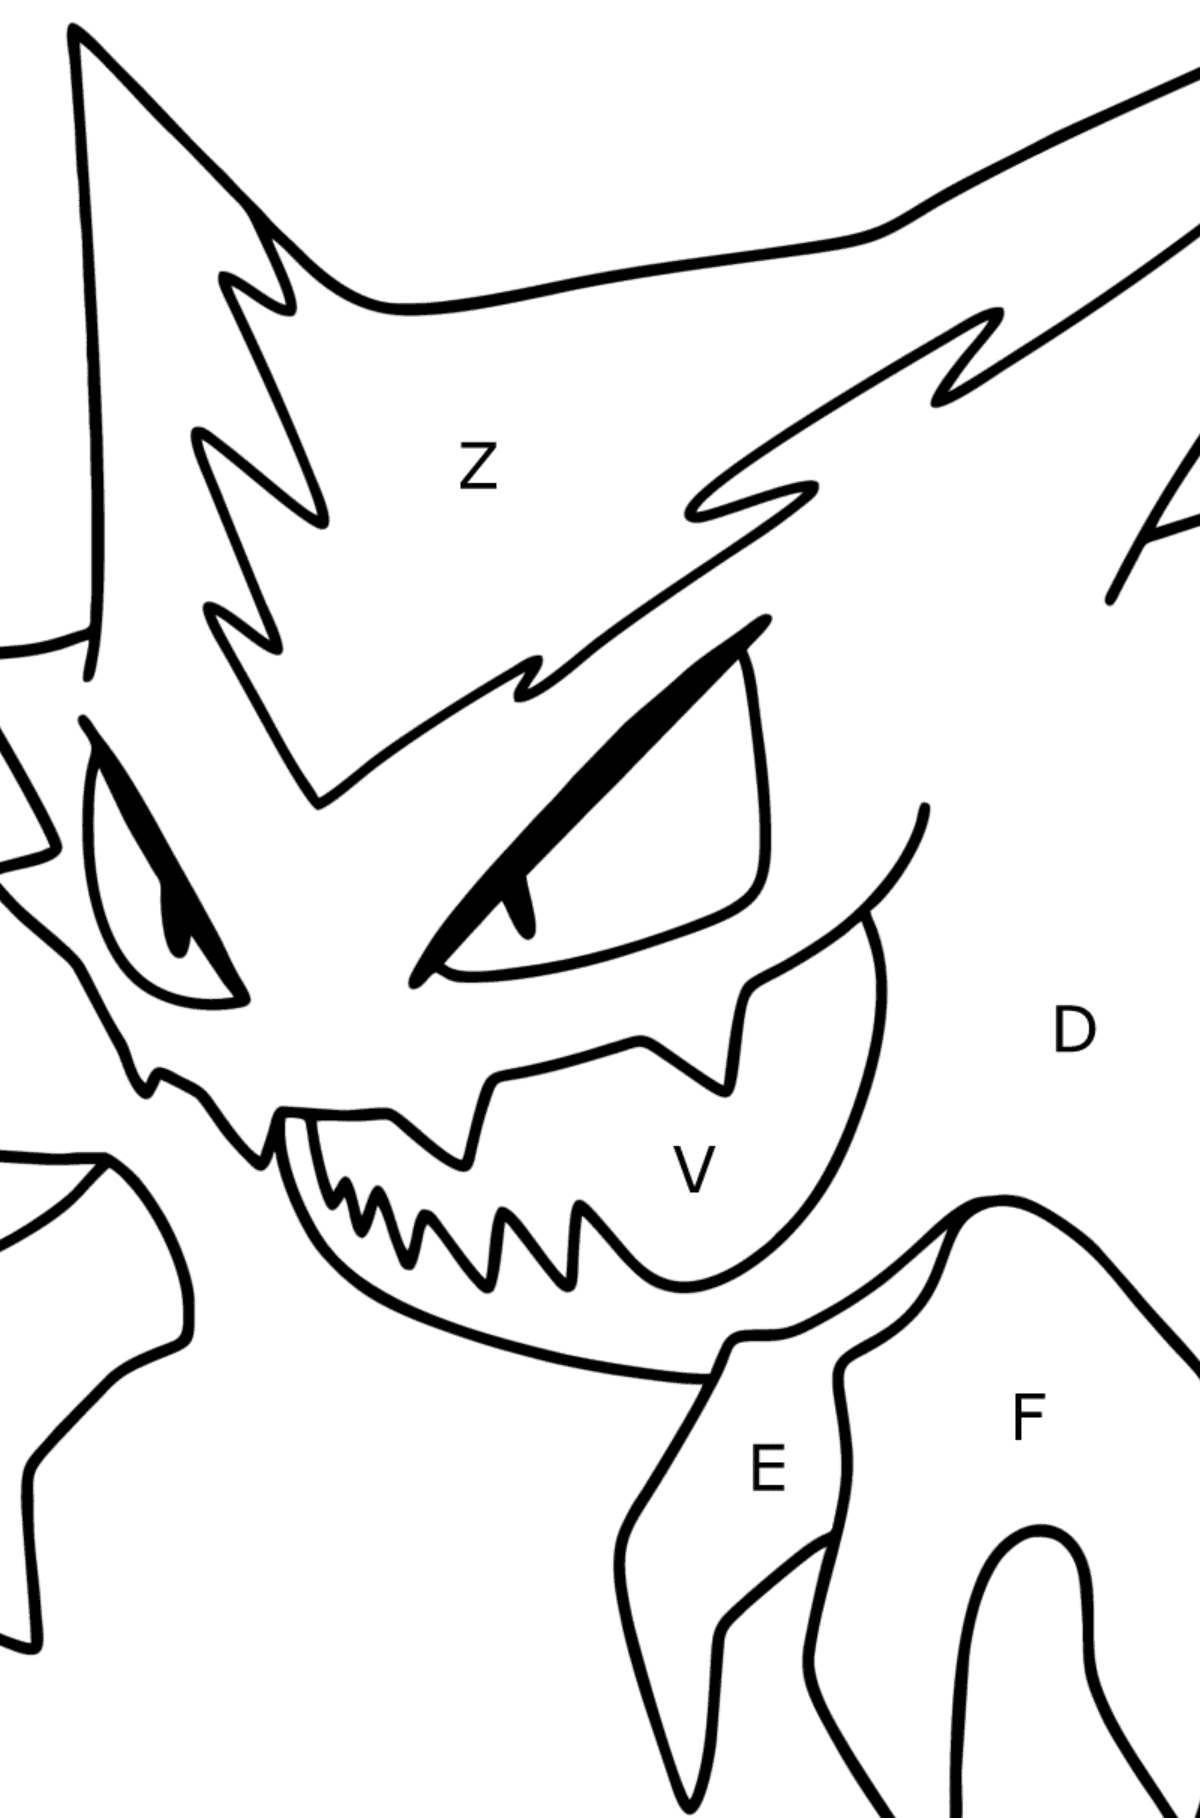 Pokémon Go Haunter coloring page - Coloring by Letters for Kids